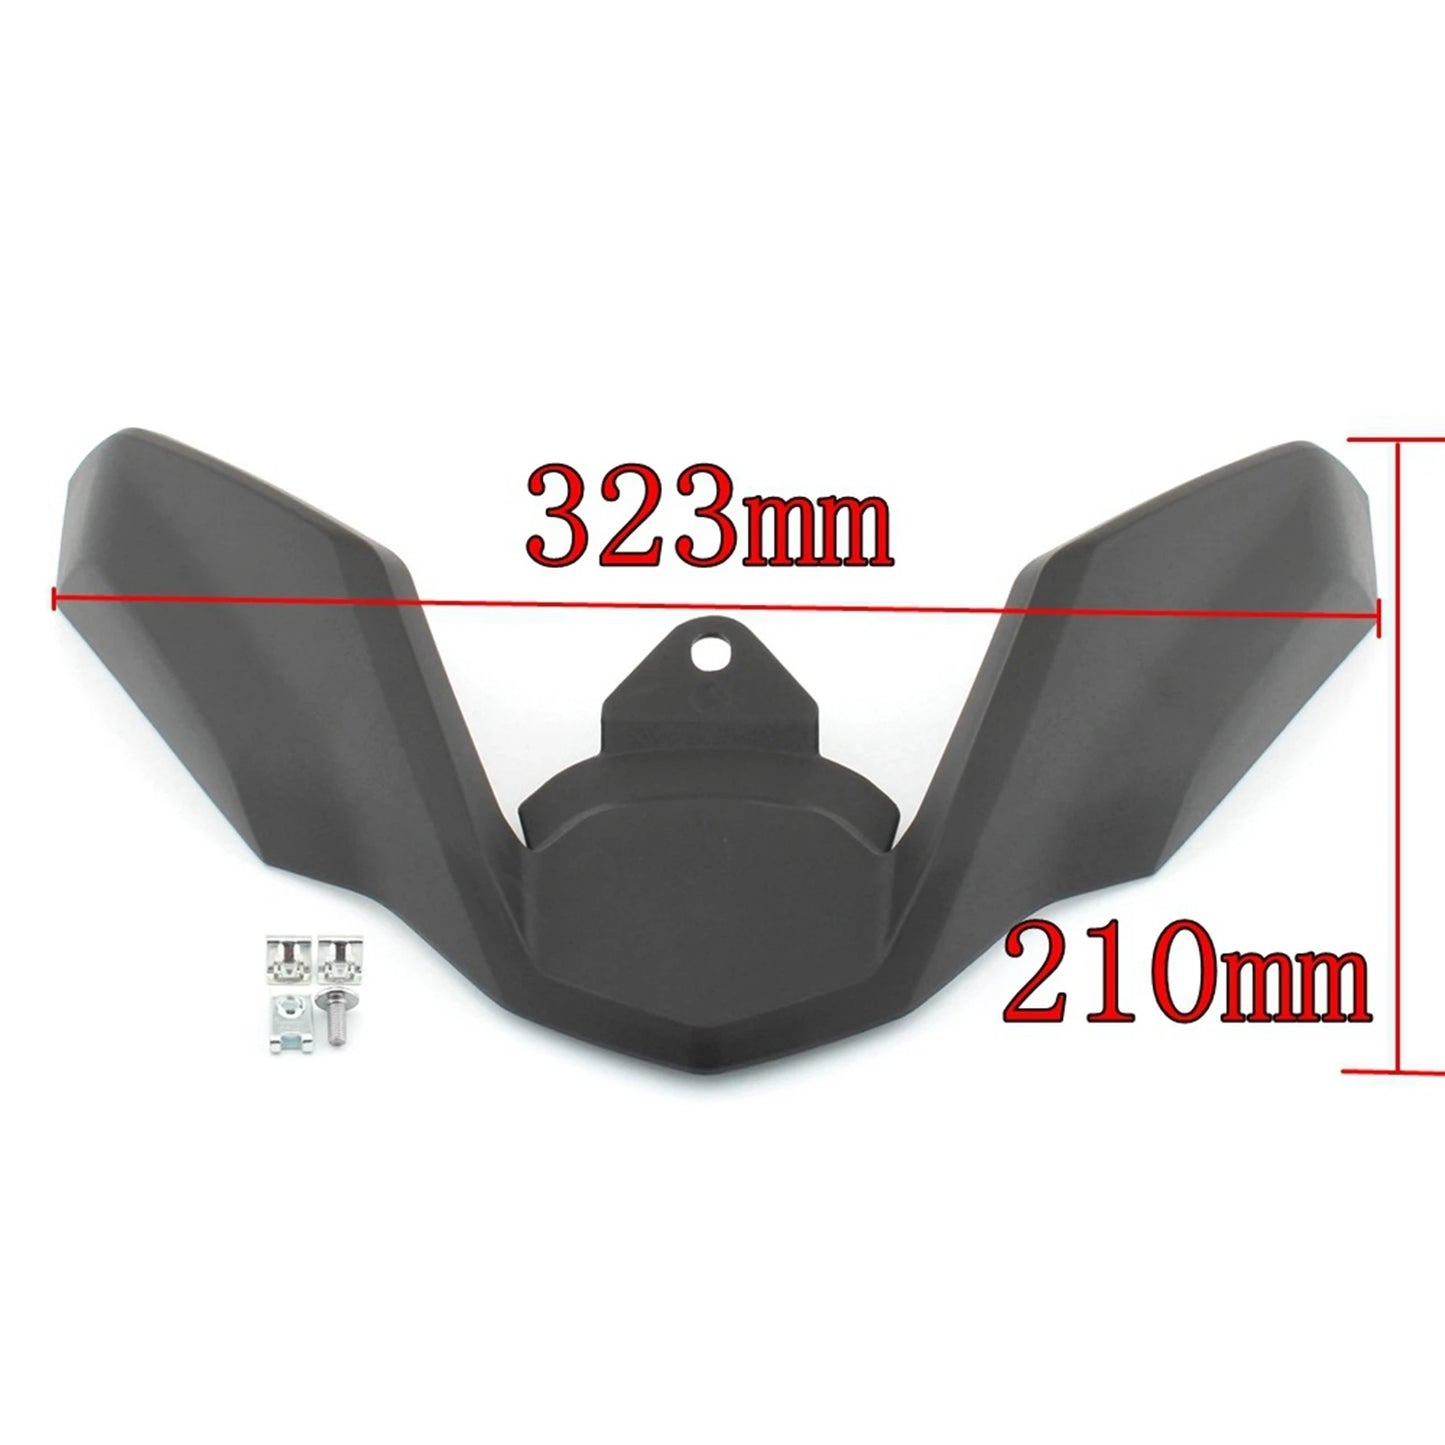 Motorcycle Front Beak Fairing Extension Wheel Extender Cover For BMW R1200GS LC 2018-2019 R1250GS 2019-2021